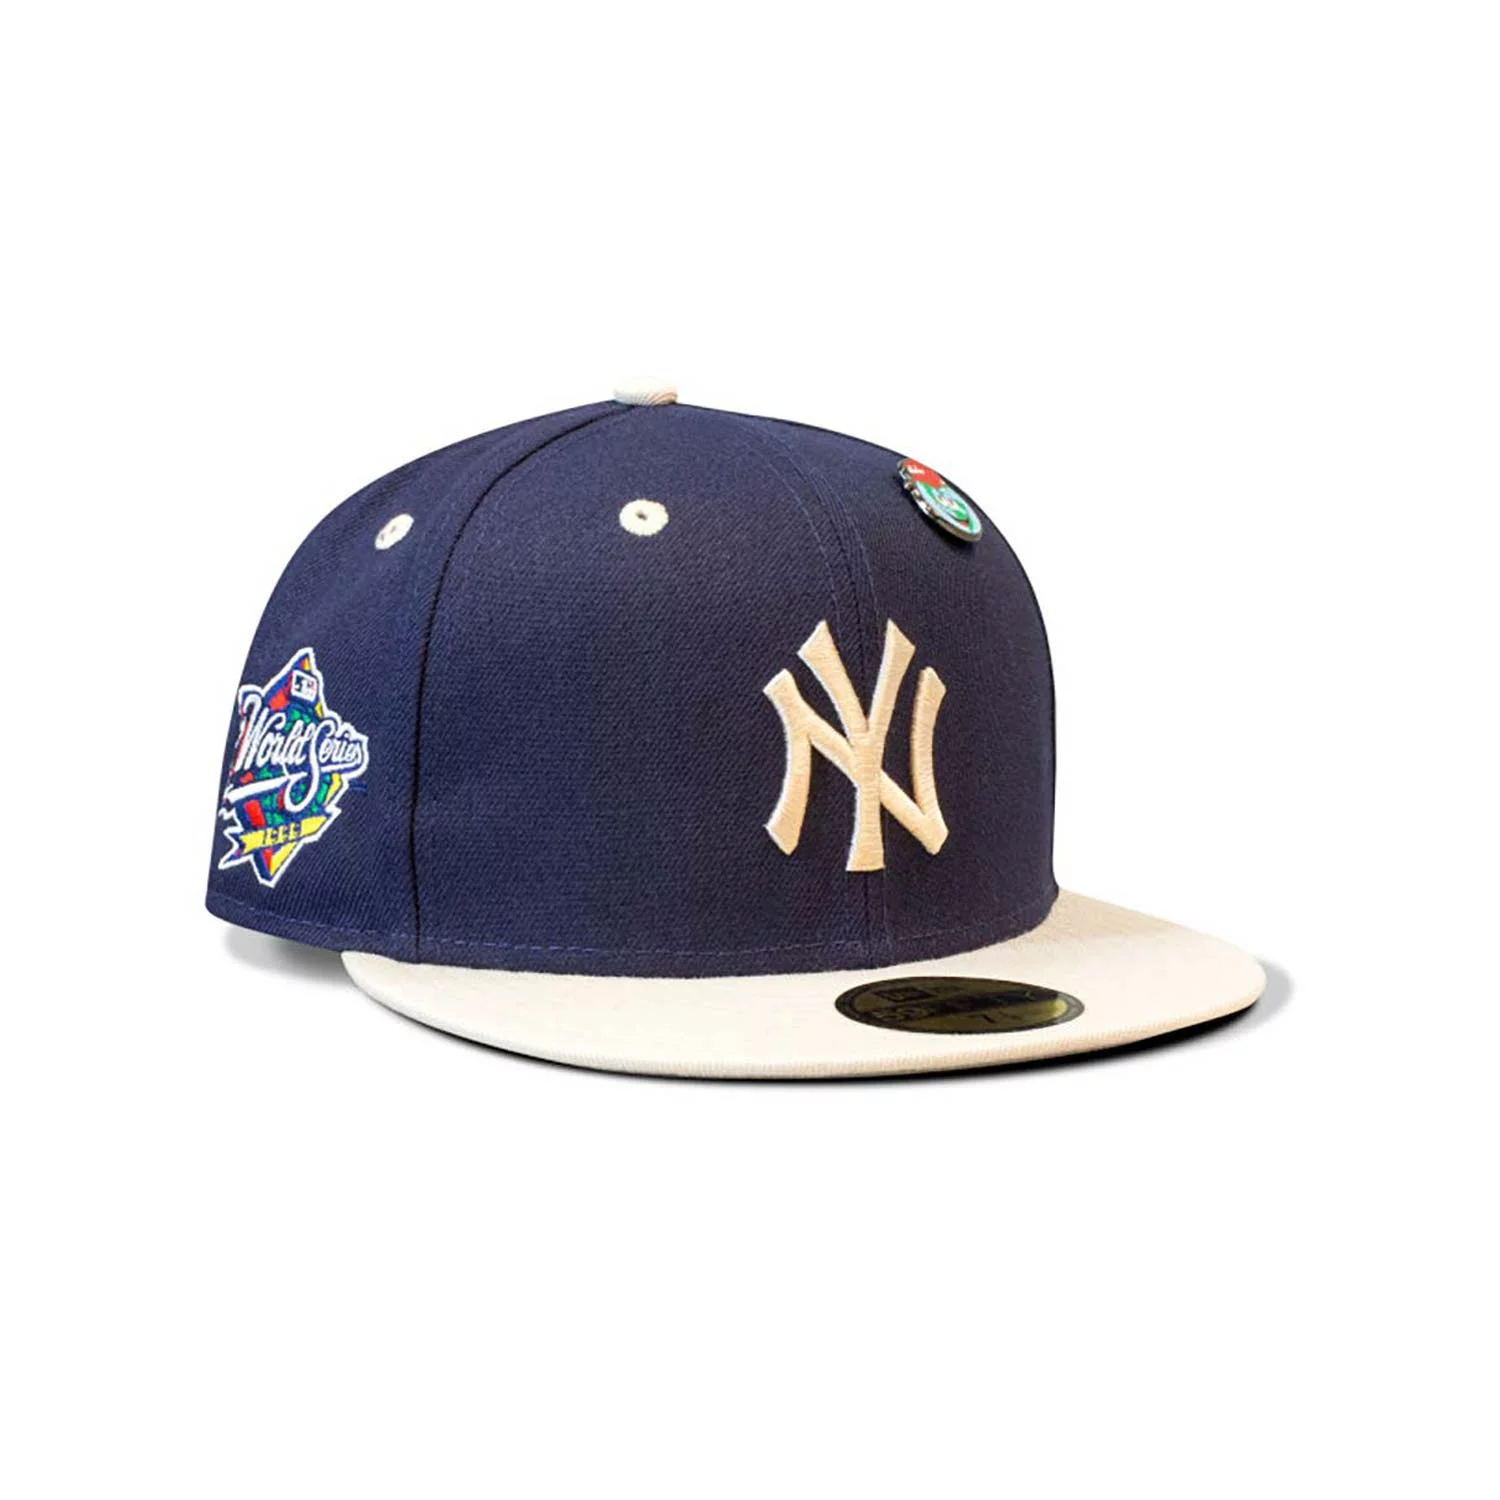 New York Yankees New Era Cap Company 59Fifty Clothing Accessories, Cap, hat,  navy Blue, clothing Accessories png